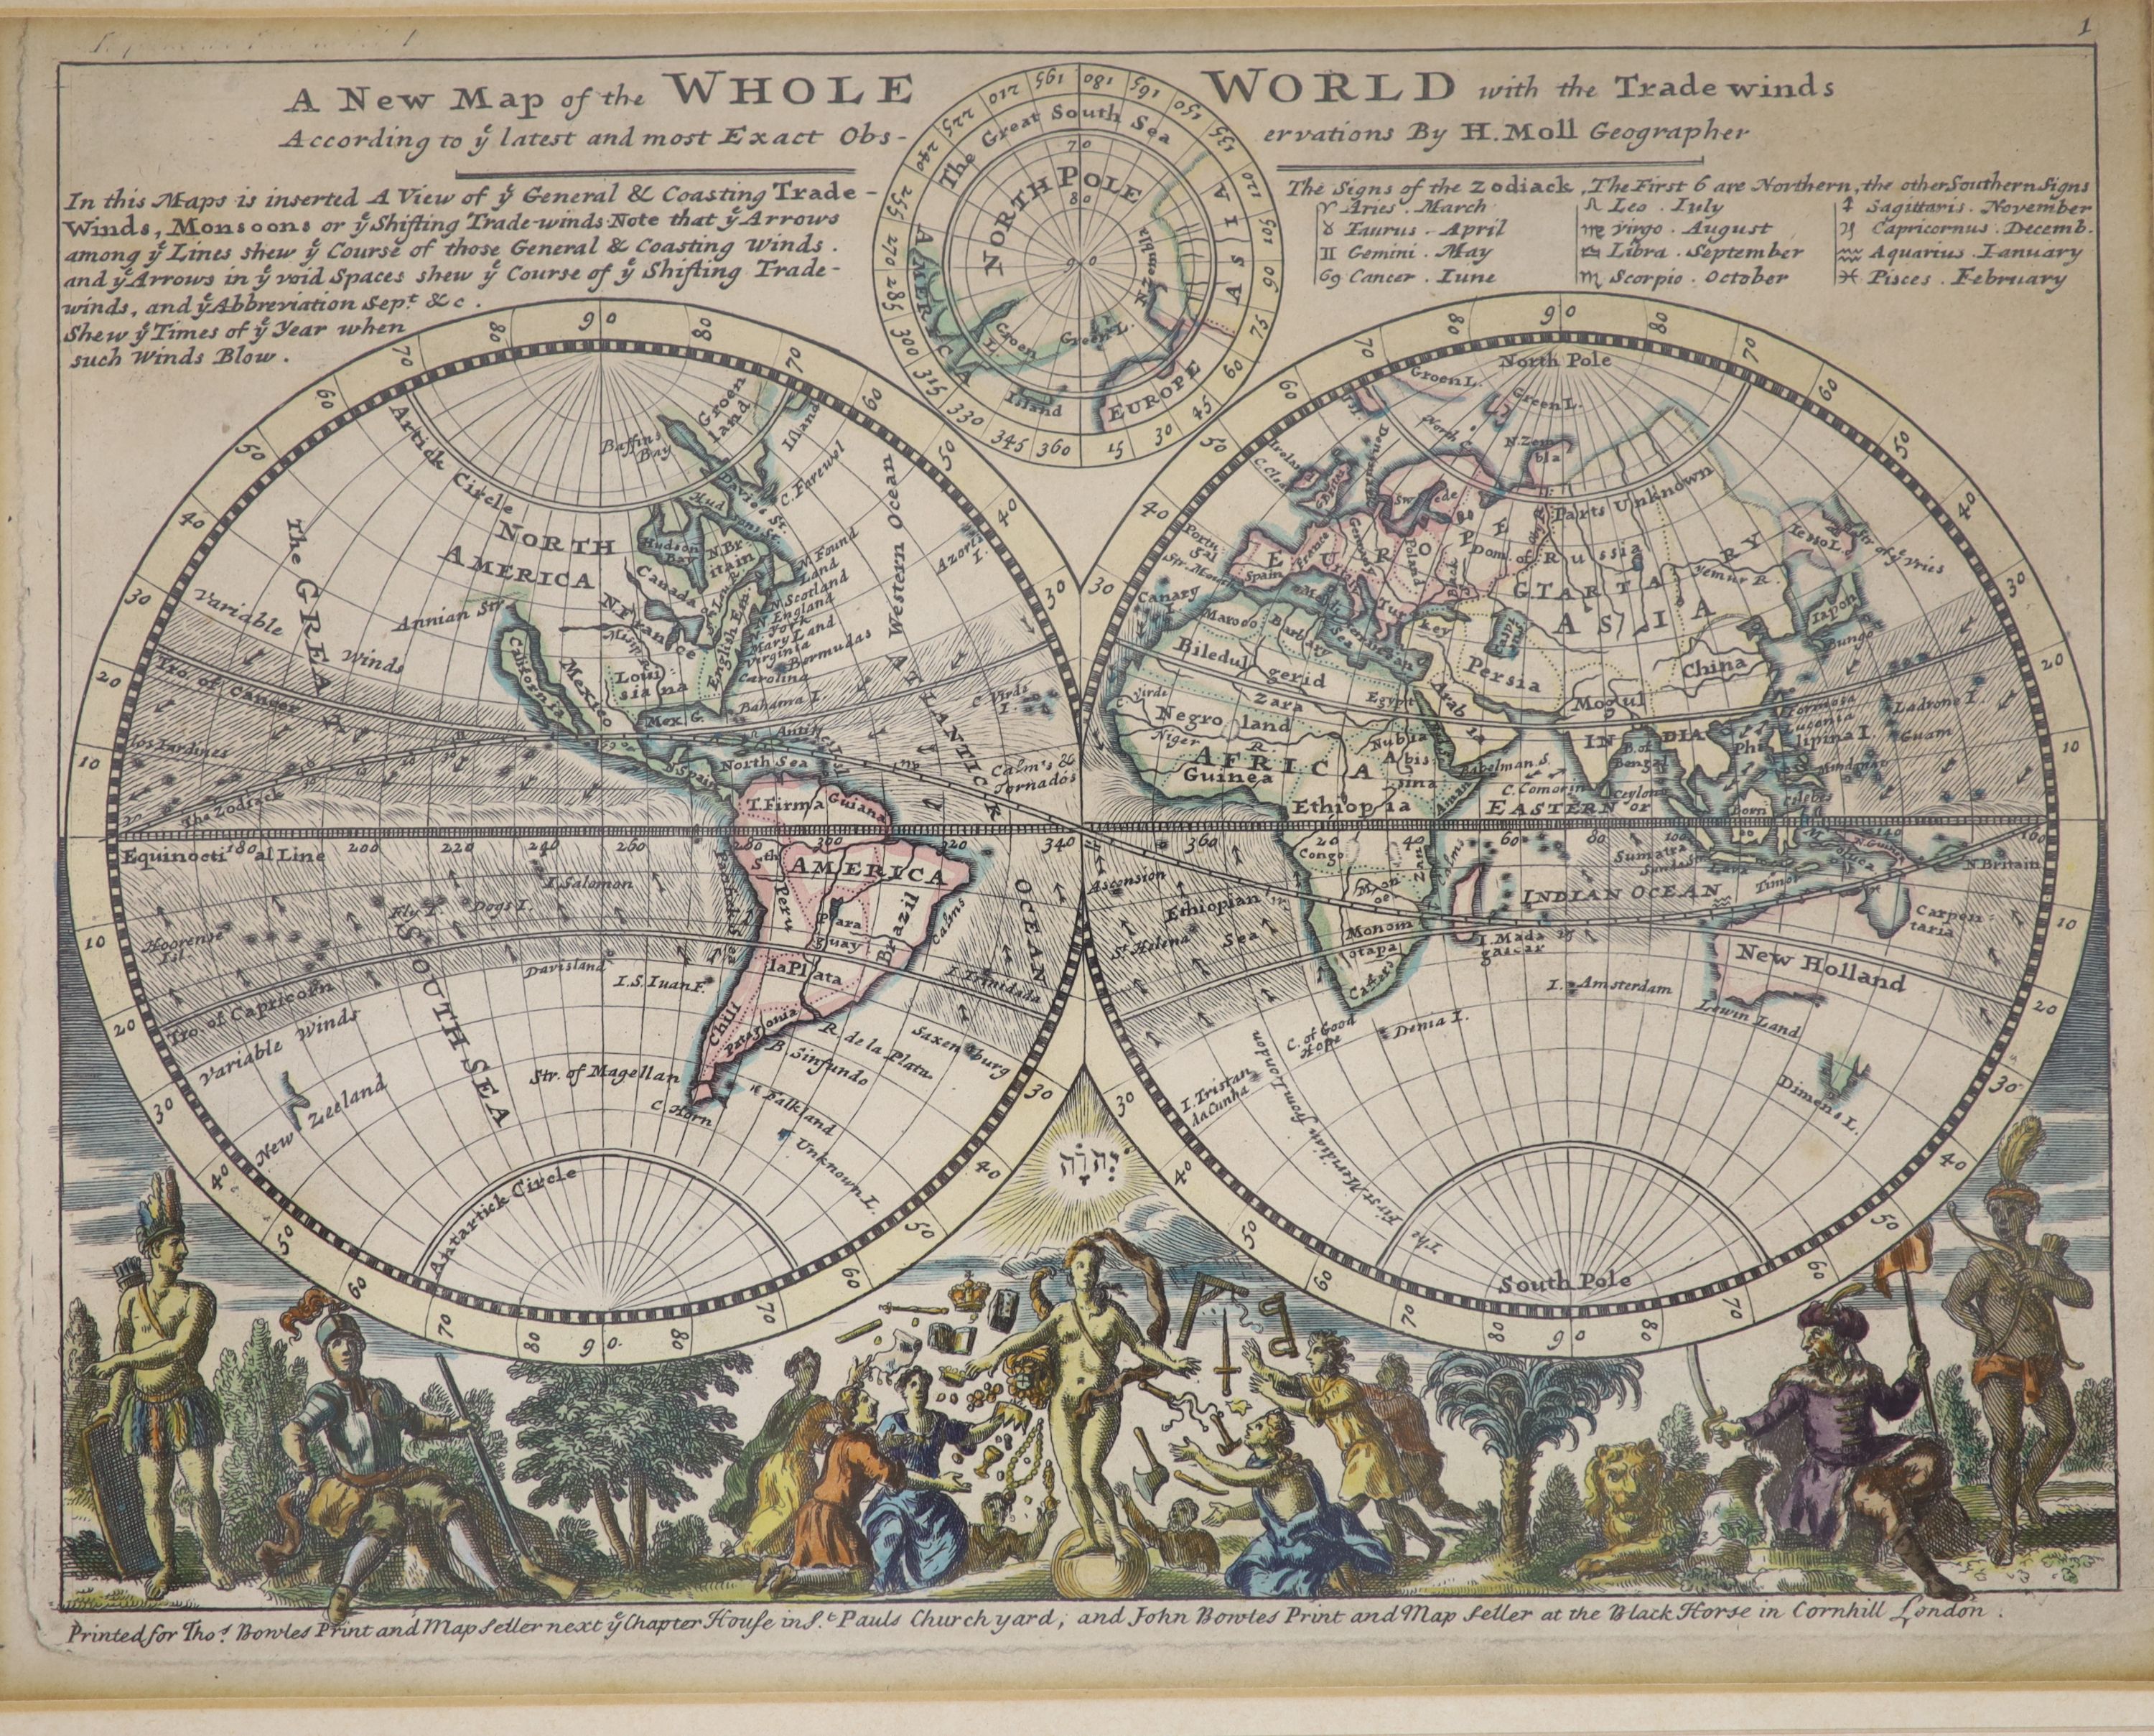 Thomas Bowles publ. after H. Moll, A New Map of the Whole World with the Trade Winds, 21 x 28cm